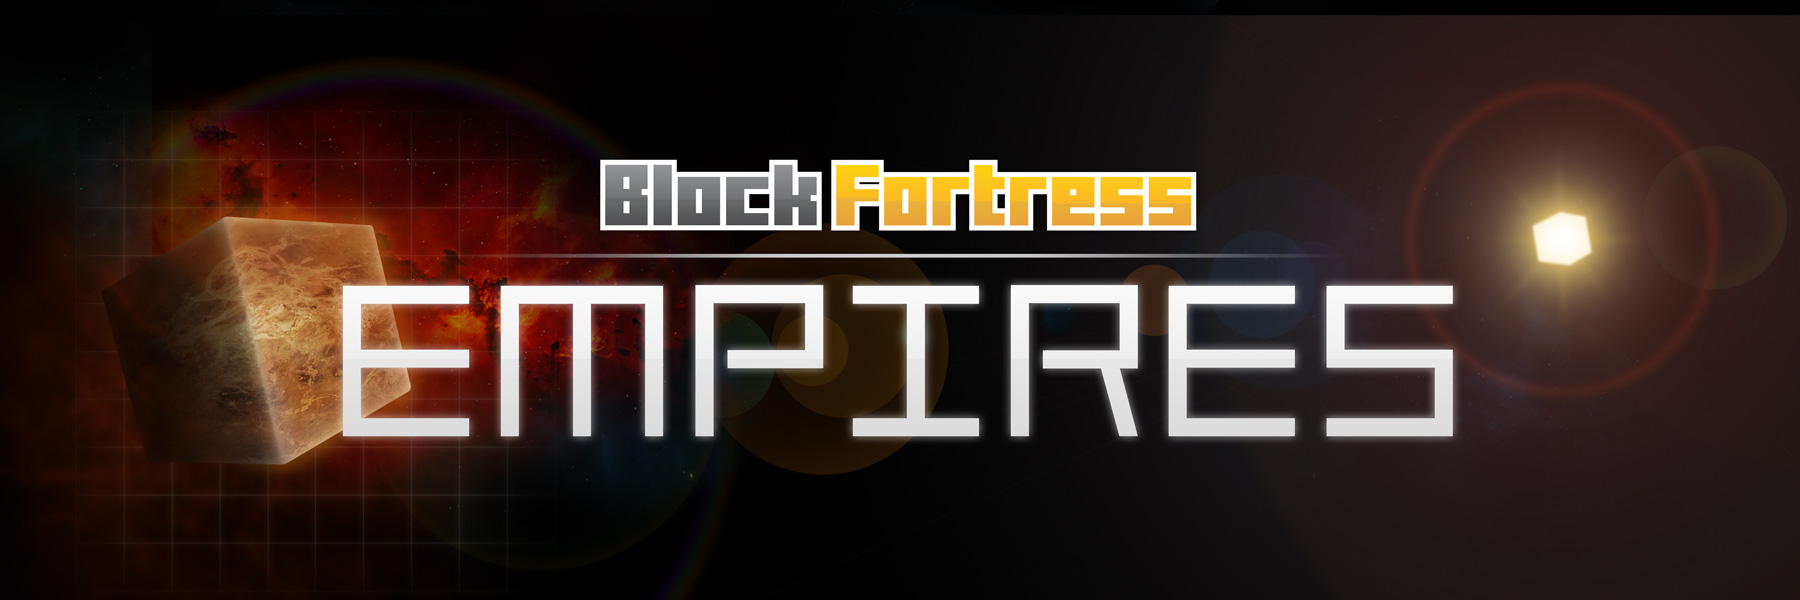 'Block Fortress: Empires' Is the Next Foursaken Media Game, and It's 'Minecraft' Meets 'Clash of Clans'